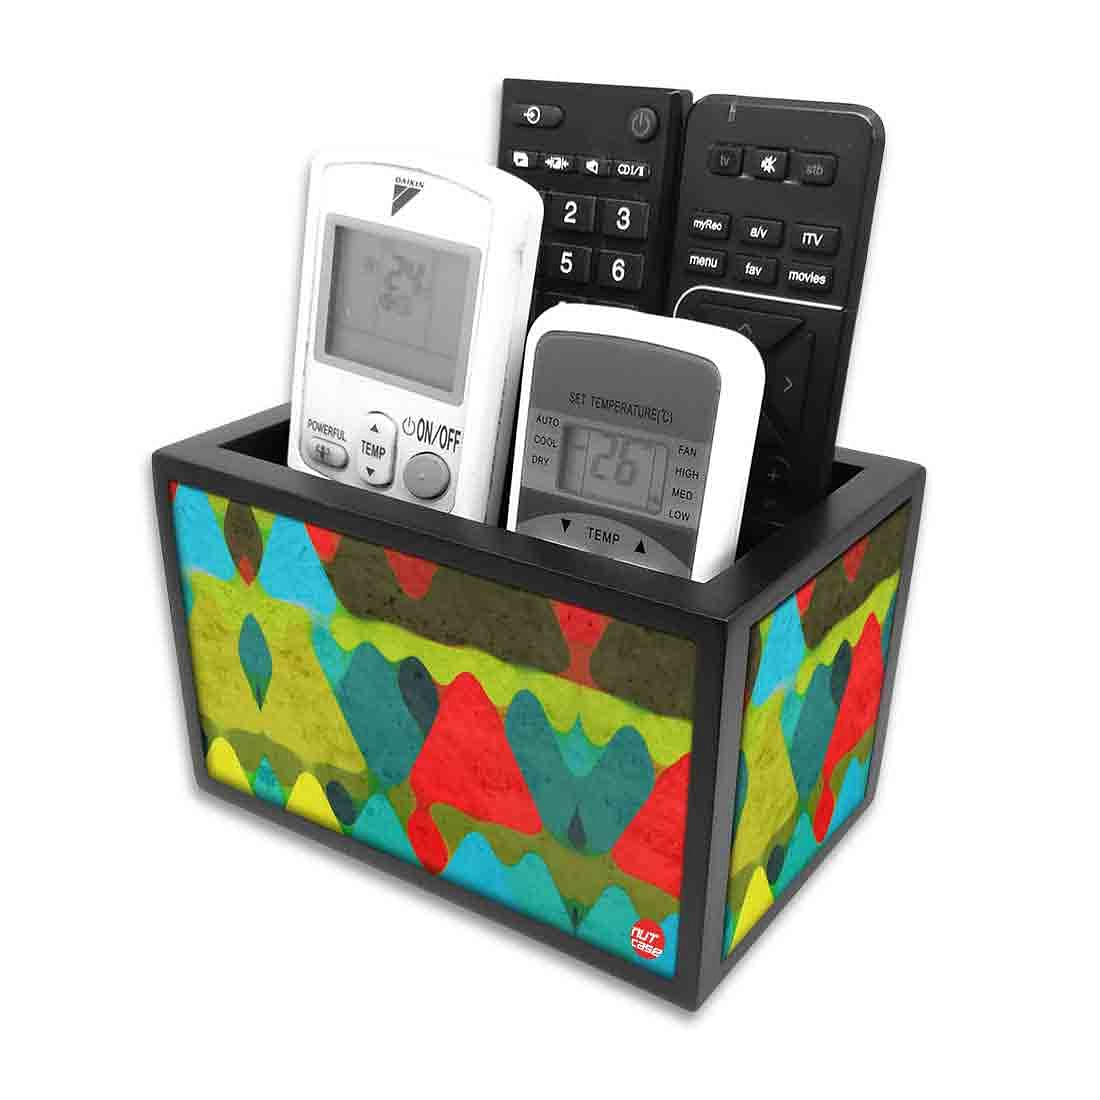 Remote Control Stand Holder Organizer For TV / AC Remotes -  Colorful Mounts Nutcase